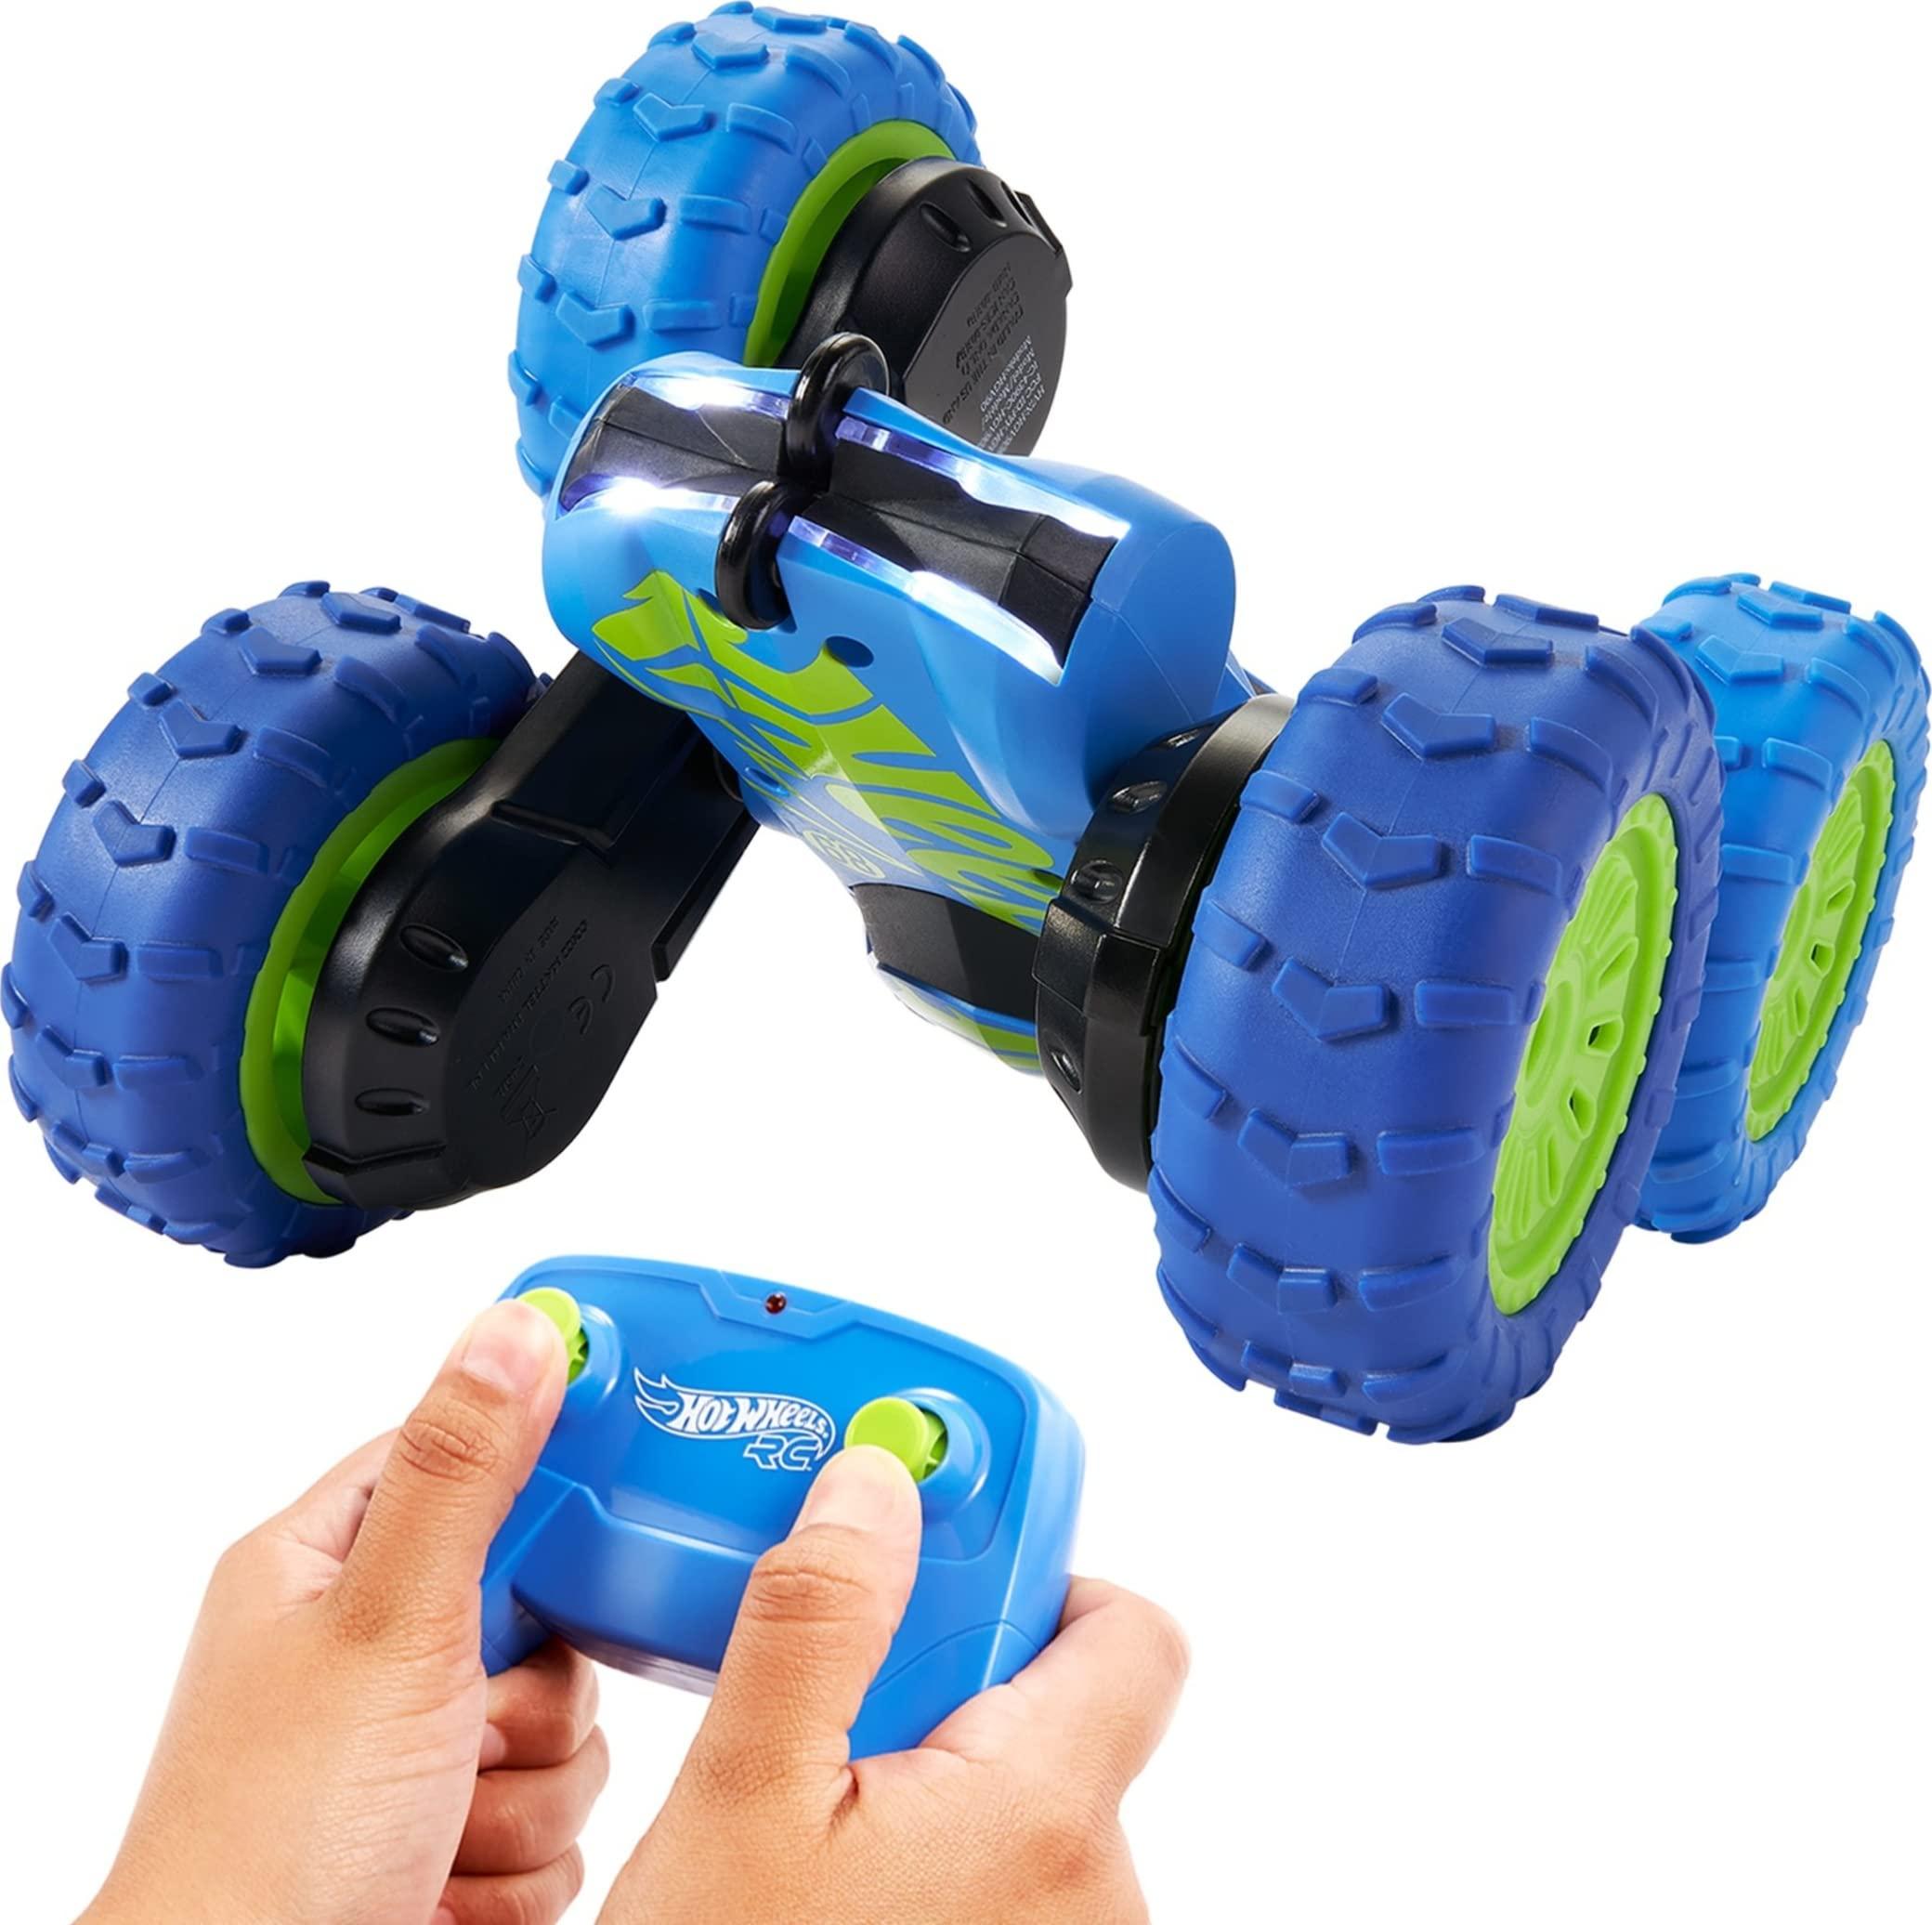 Hot Wheels Remote Control Truck: Hot Wheels RC Truck: Speed, Maneuverability, and Top Performance